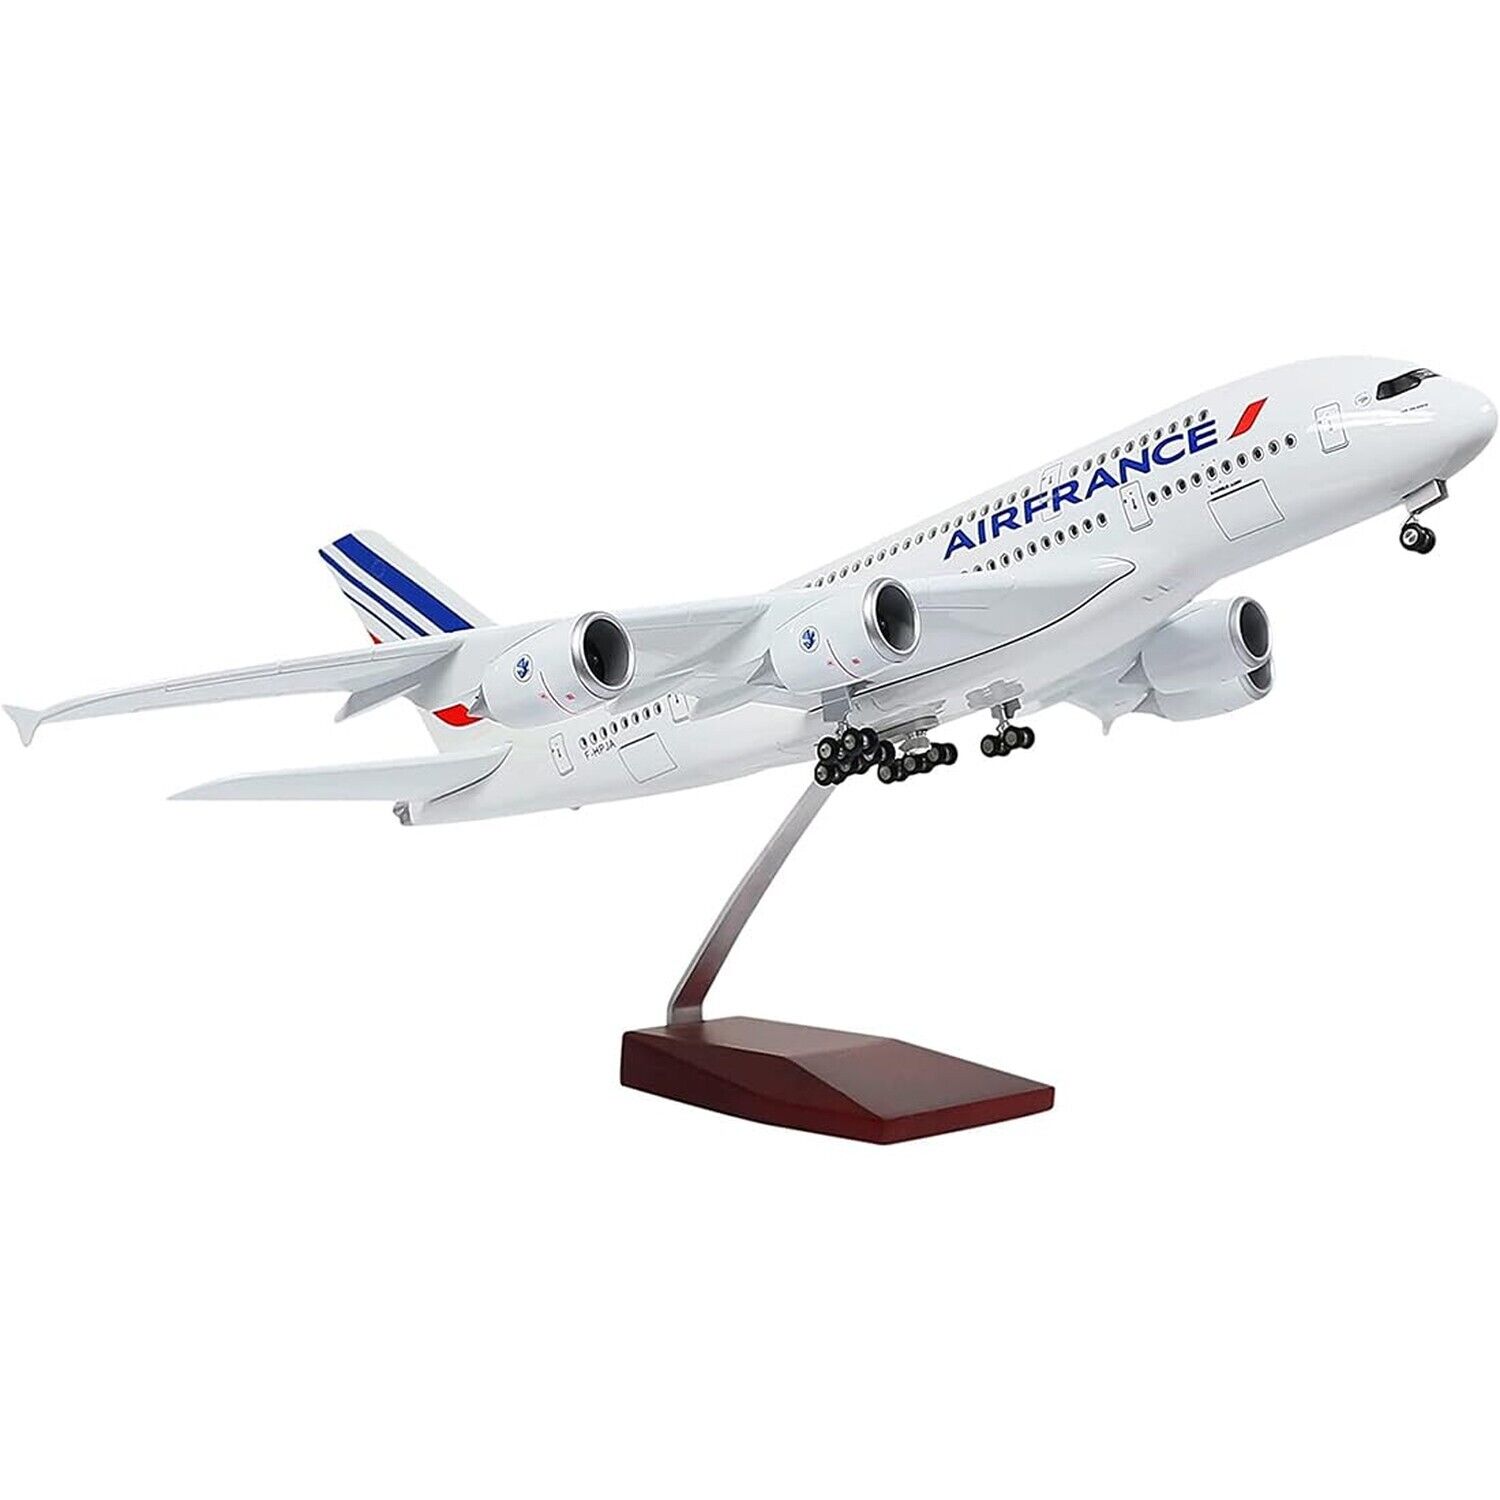 ANDSYYDS 1:160 Scale Large Model Airplane Airbus A380 Air France Plane Model ...